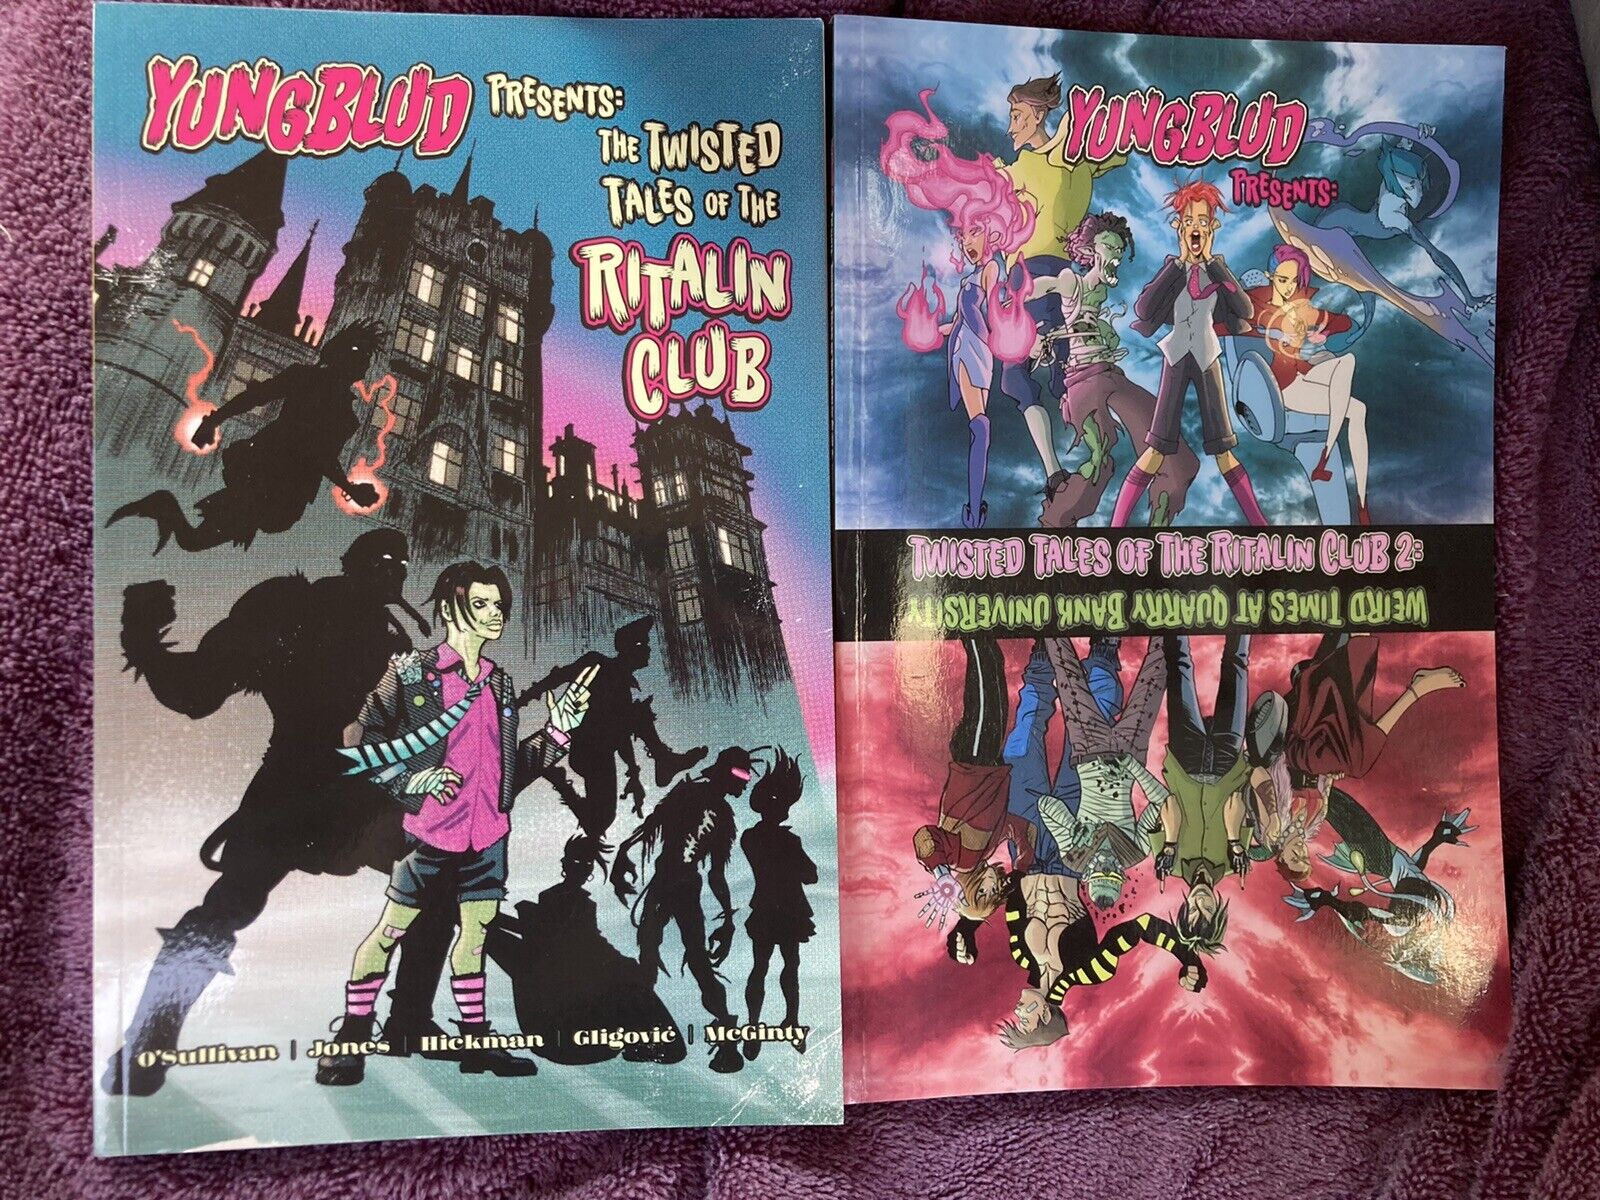 YUNGBLUD Presents the Twisted Tales of the Ritalin Club by YUNGBLUD Vol 1 & 2